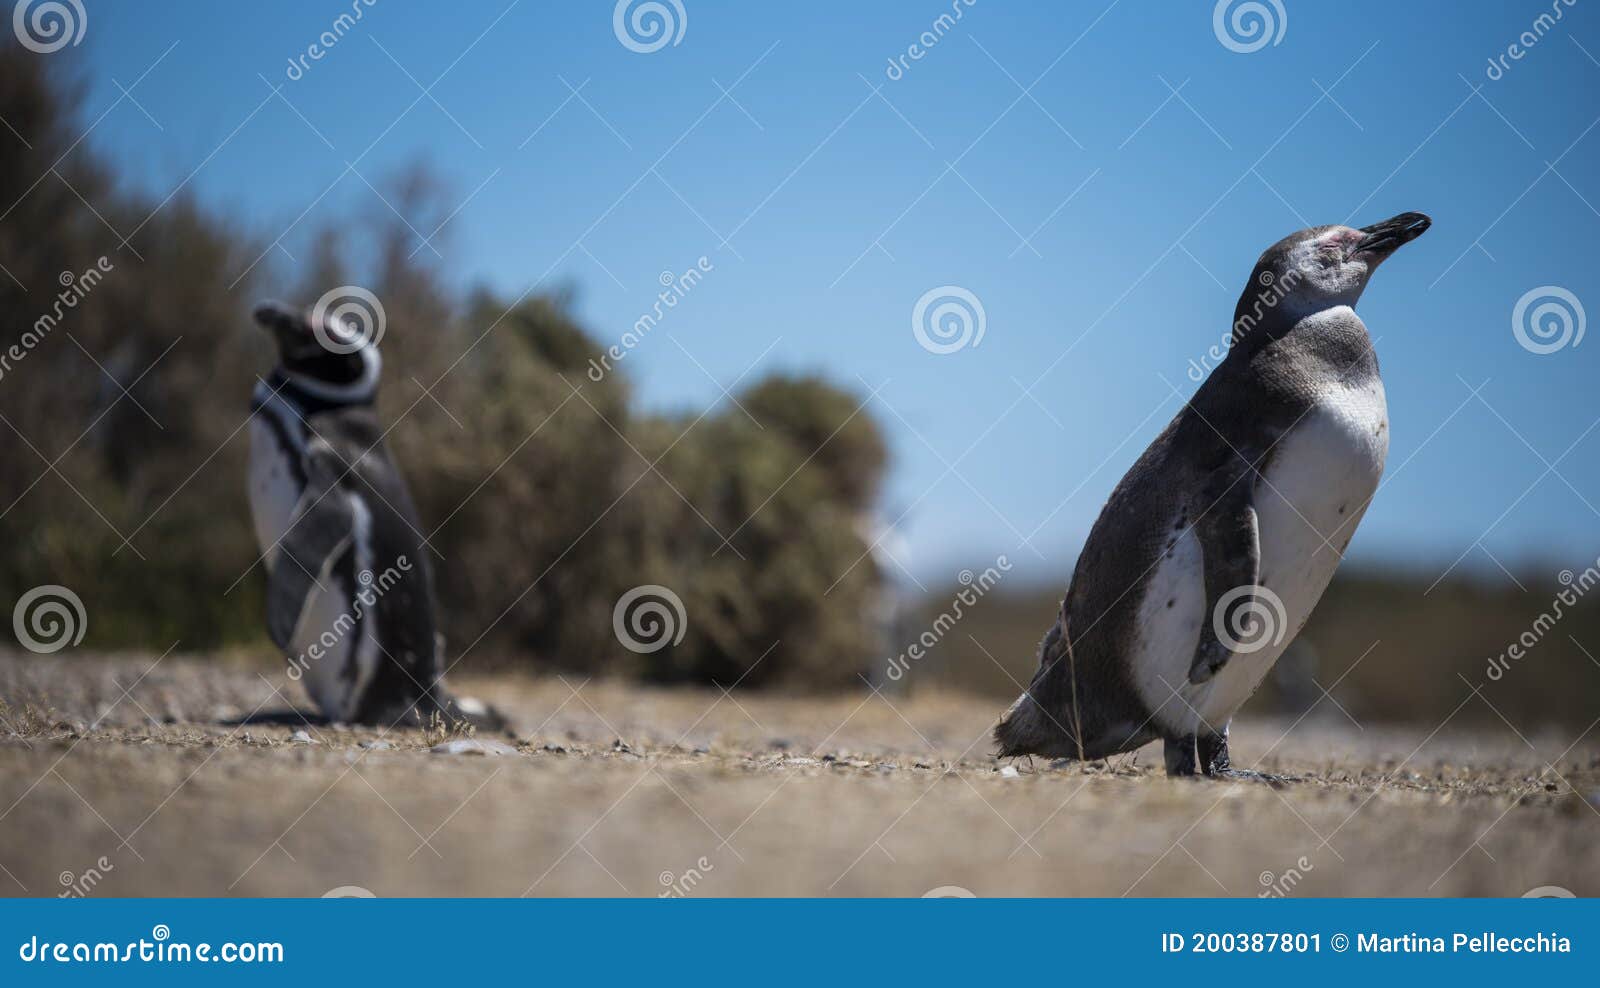 couple of beautiful penguins dwelling free in a natural national park in north patagonia near the city of puerto madryn in